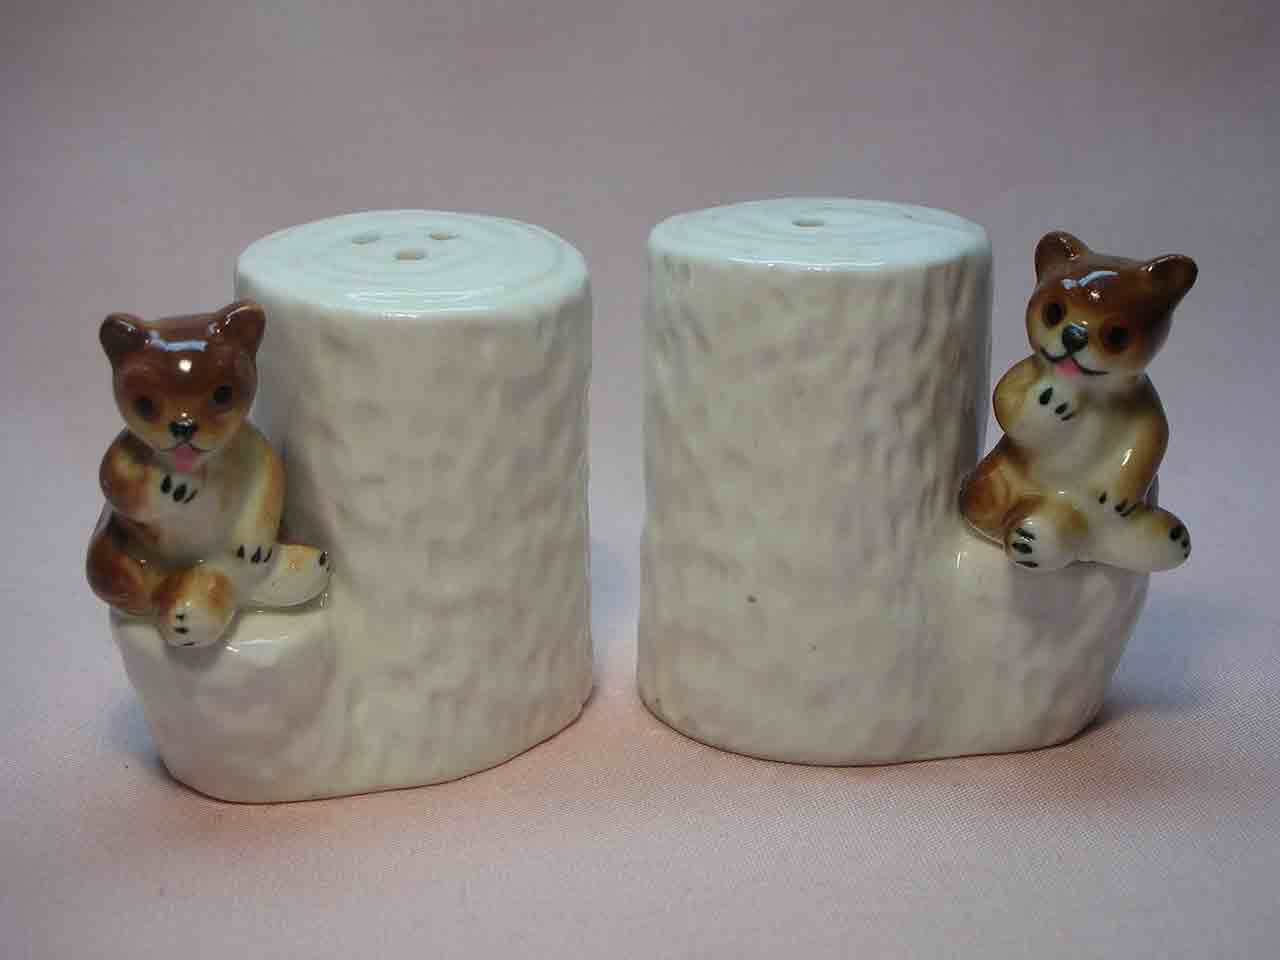 Bone China animals by white tree stumps salt and pepper shakers - brown bears